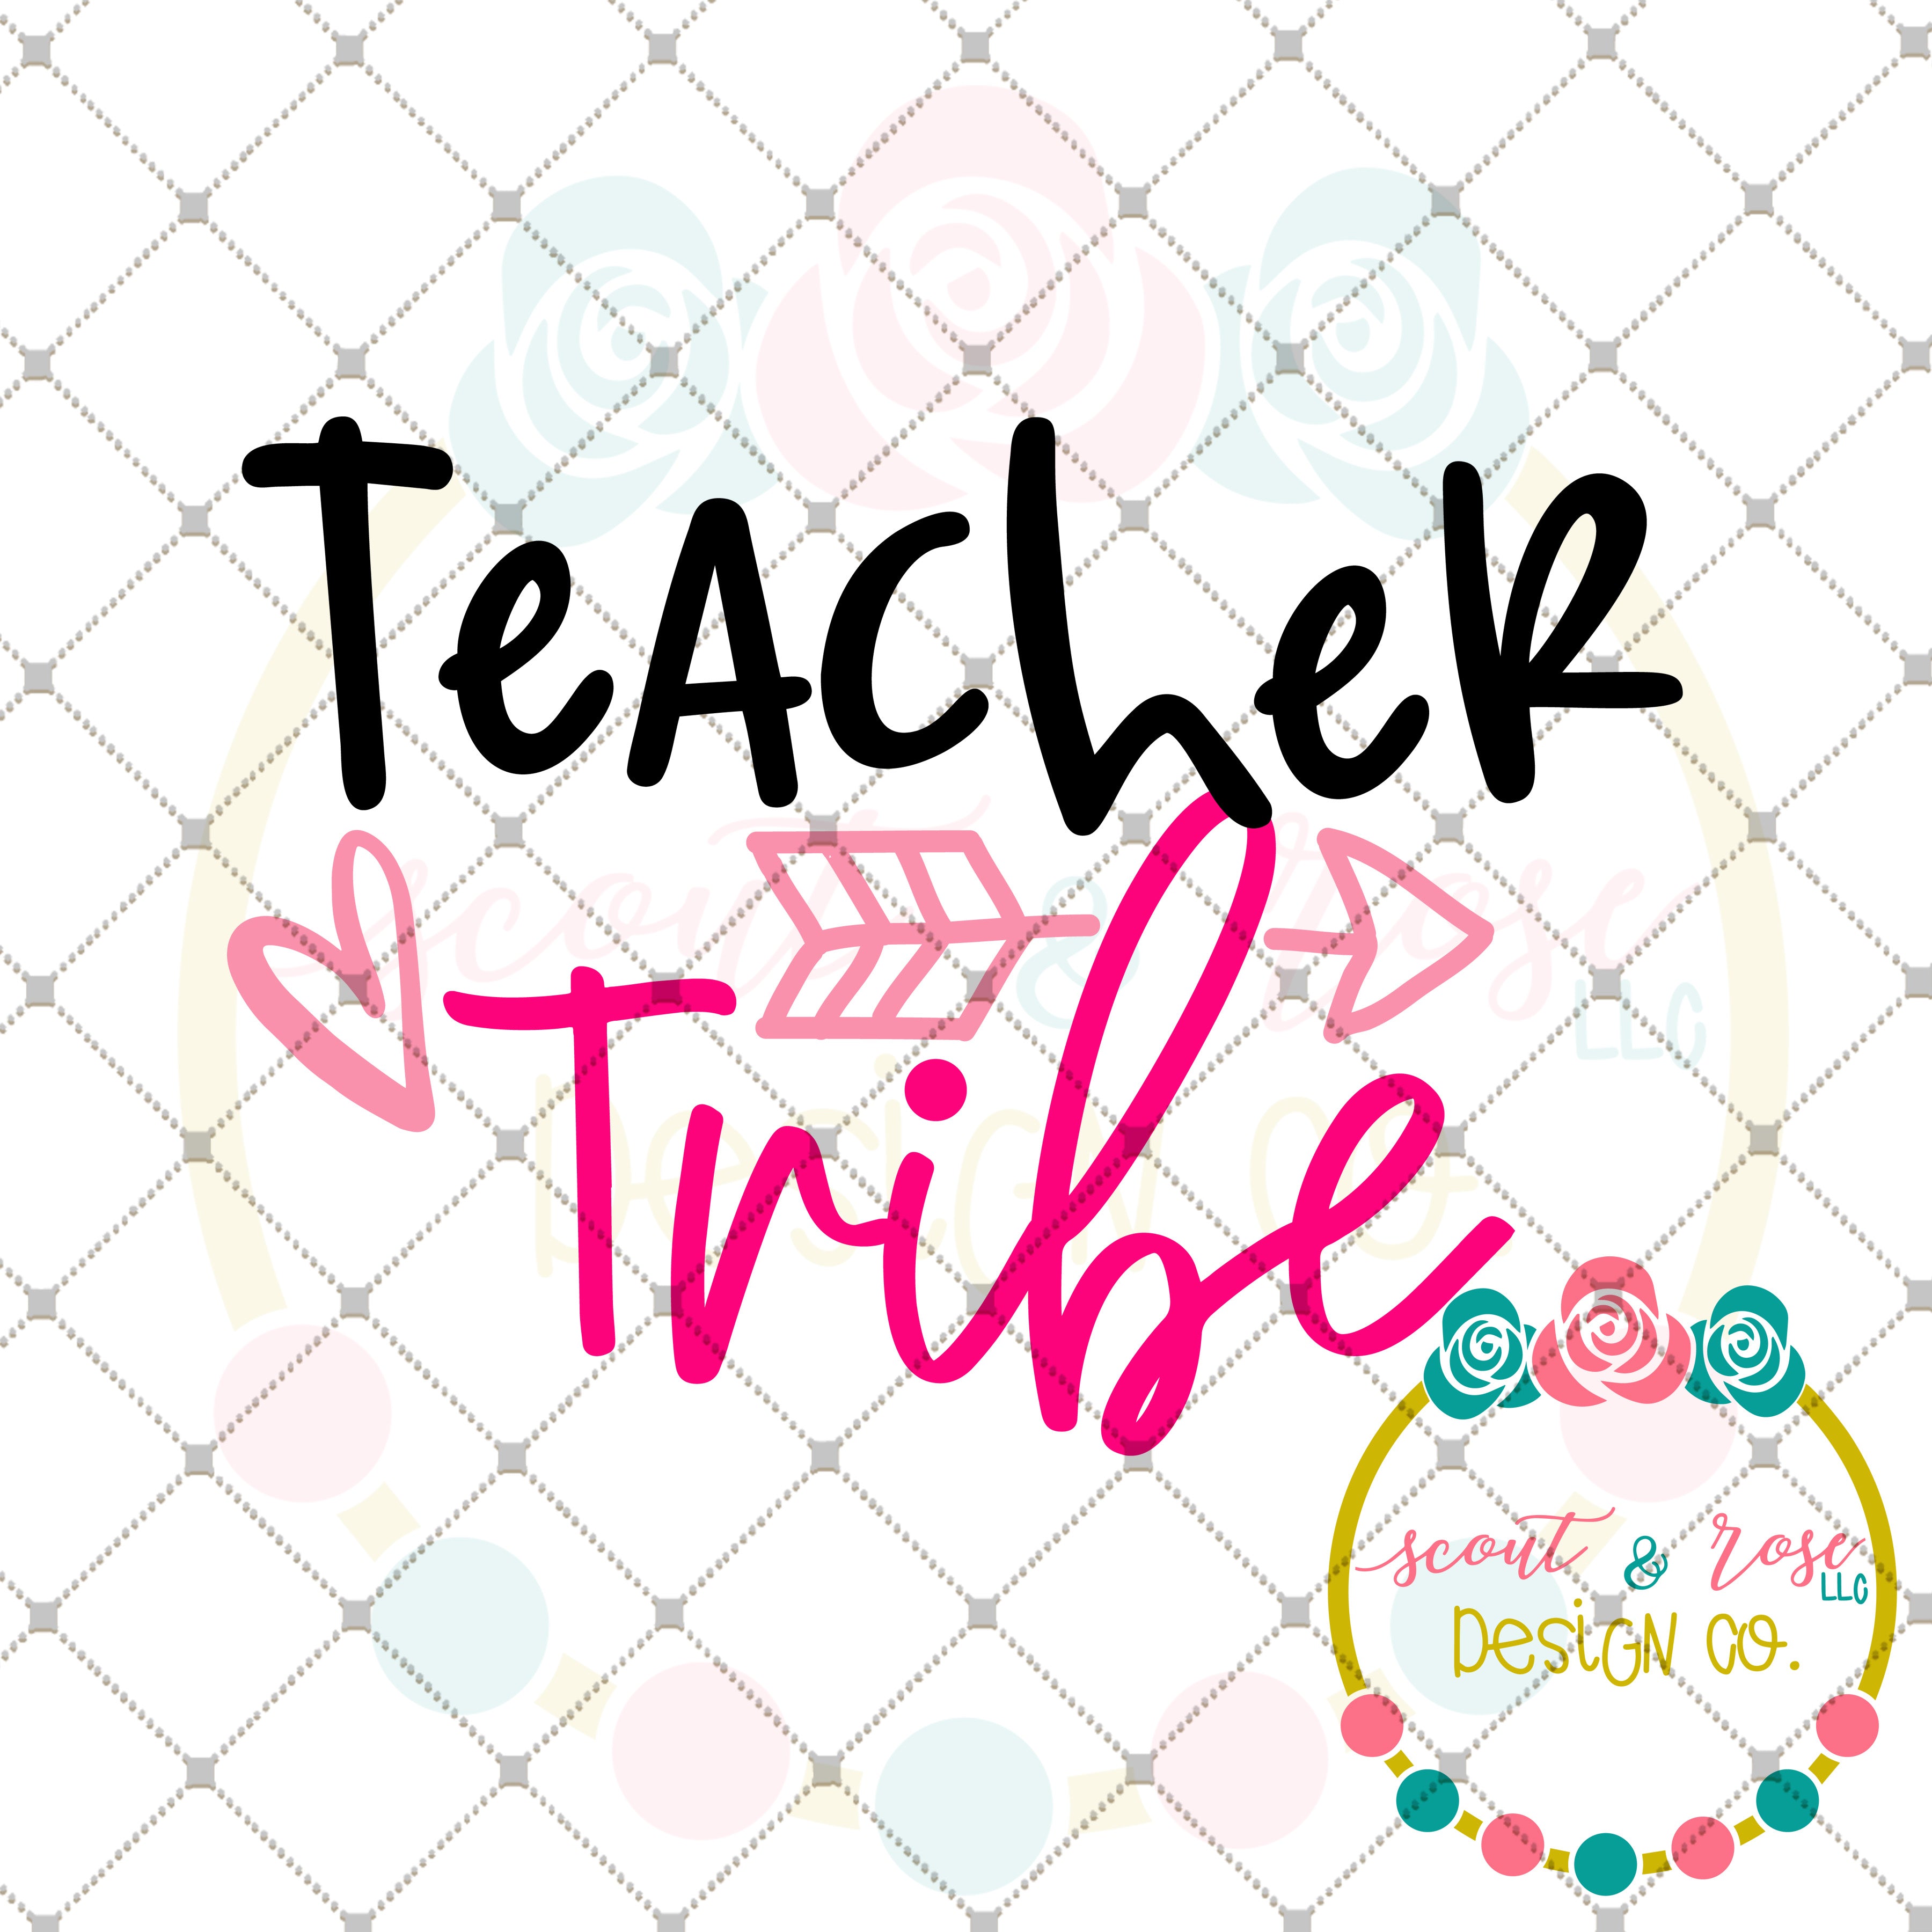 Download Teacher Tribe Svg Dxf Png Scout And Rose Design Co